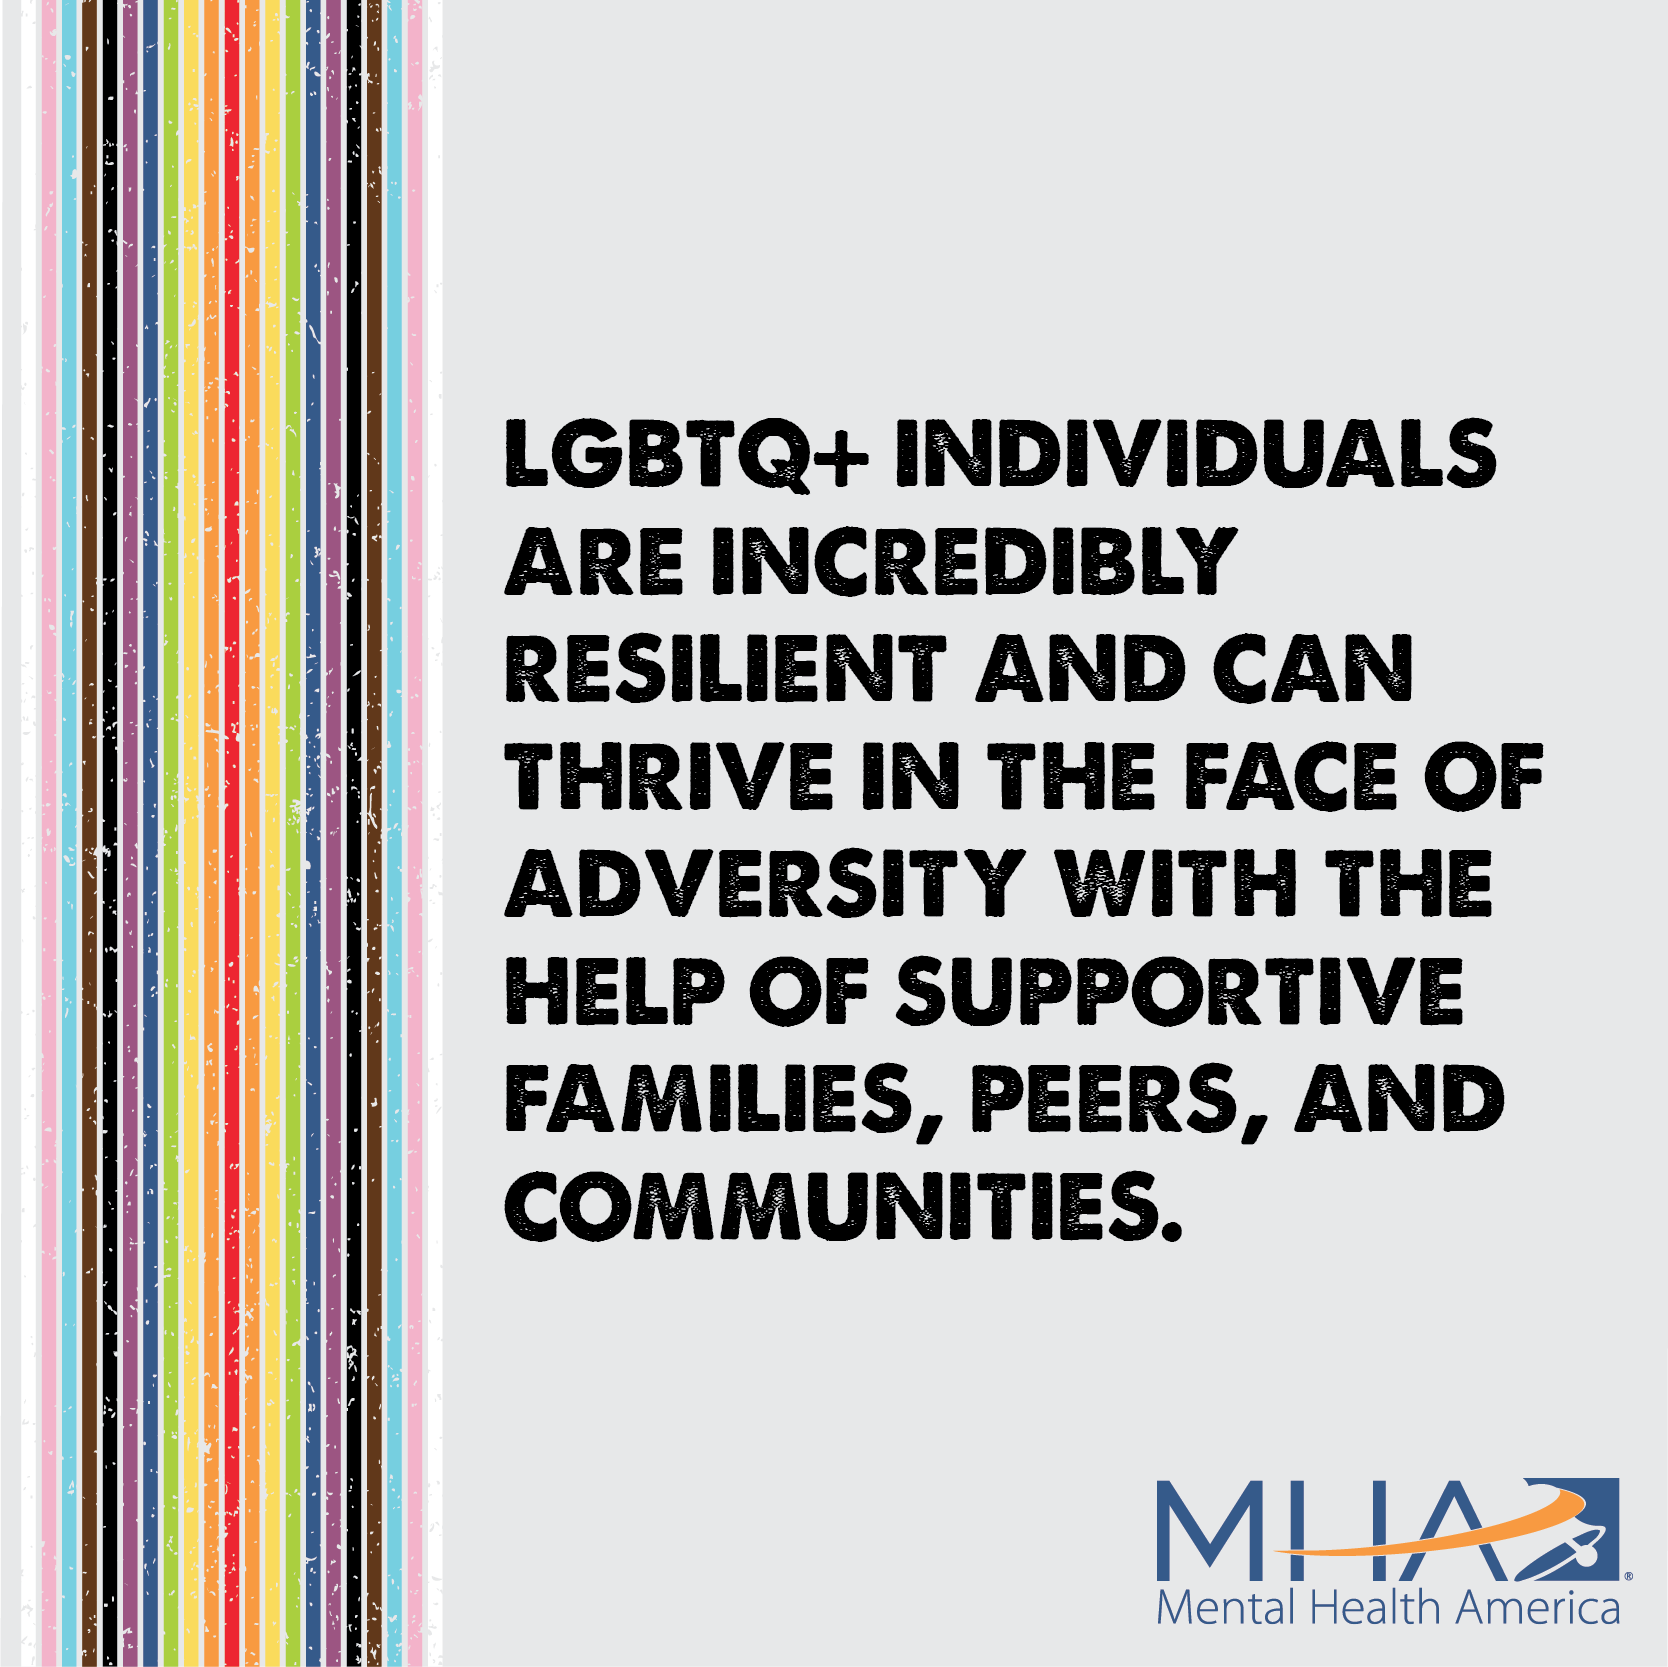 LGBTQ+ indivduals are incredibly resilient and can thrive in the face of adversity with the help of supportive families, peers, and communities.